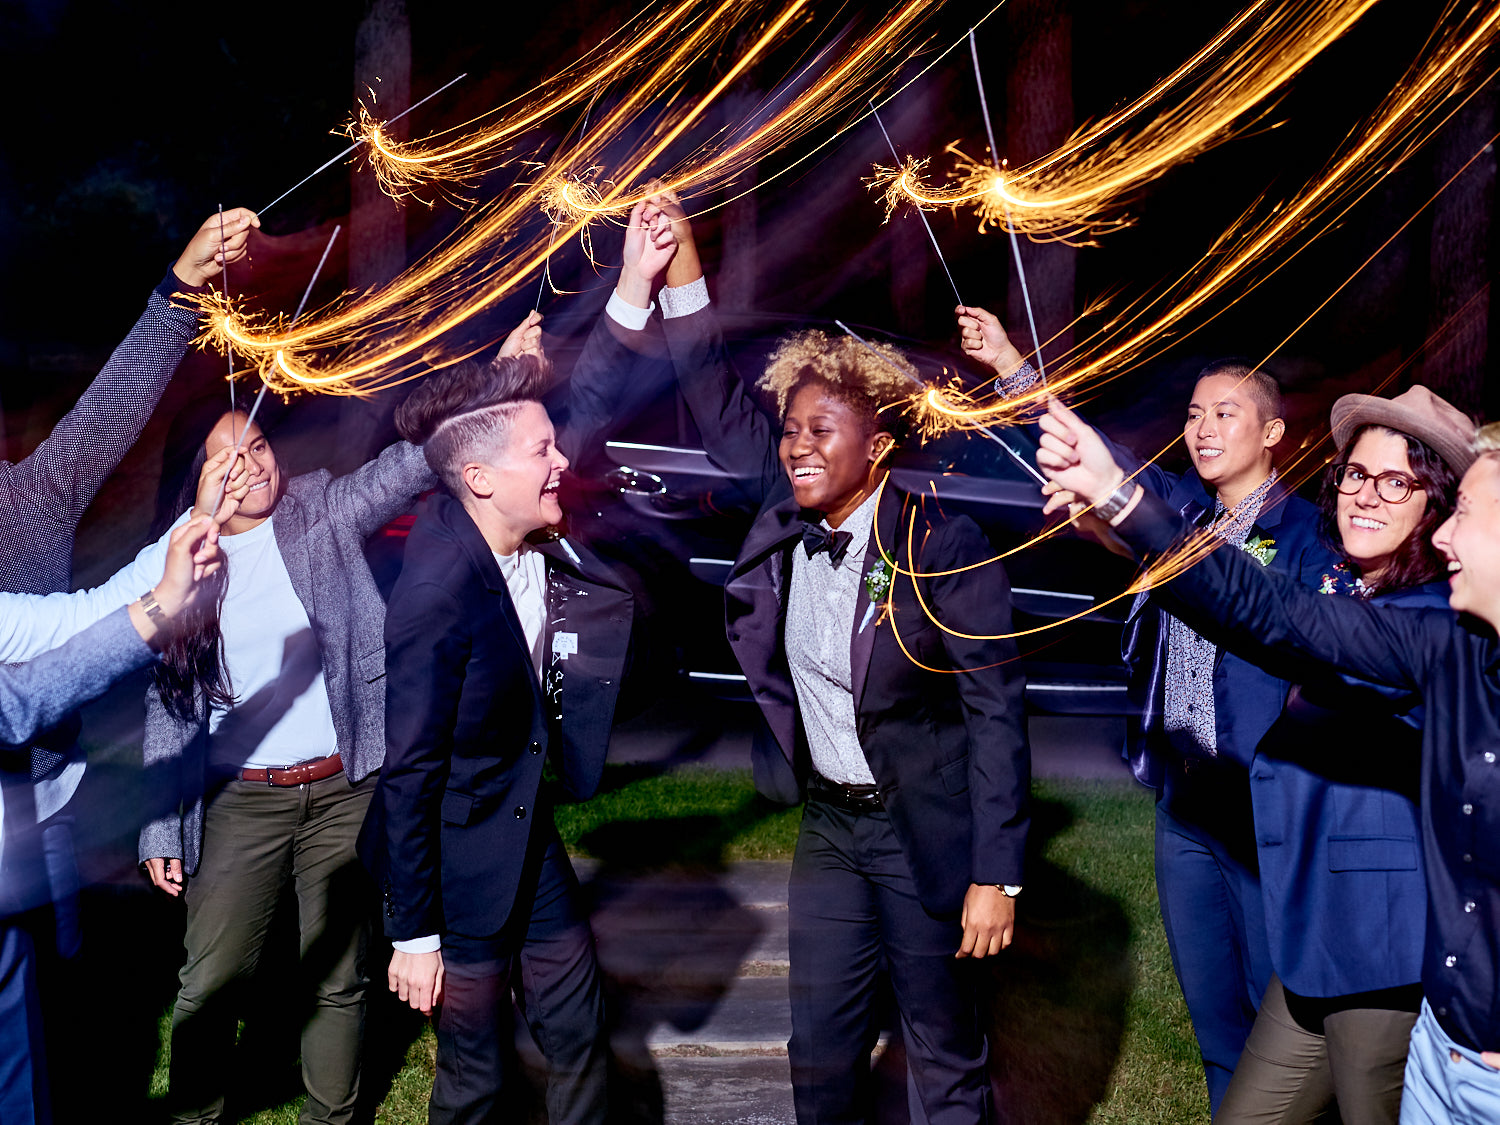 A group of models with sparklers wearing clothing from Kirrin Finch in a night setting.